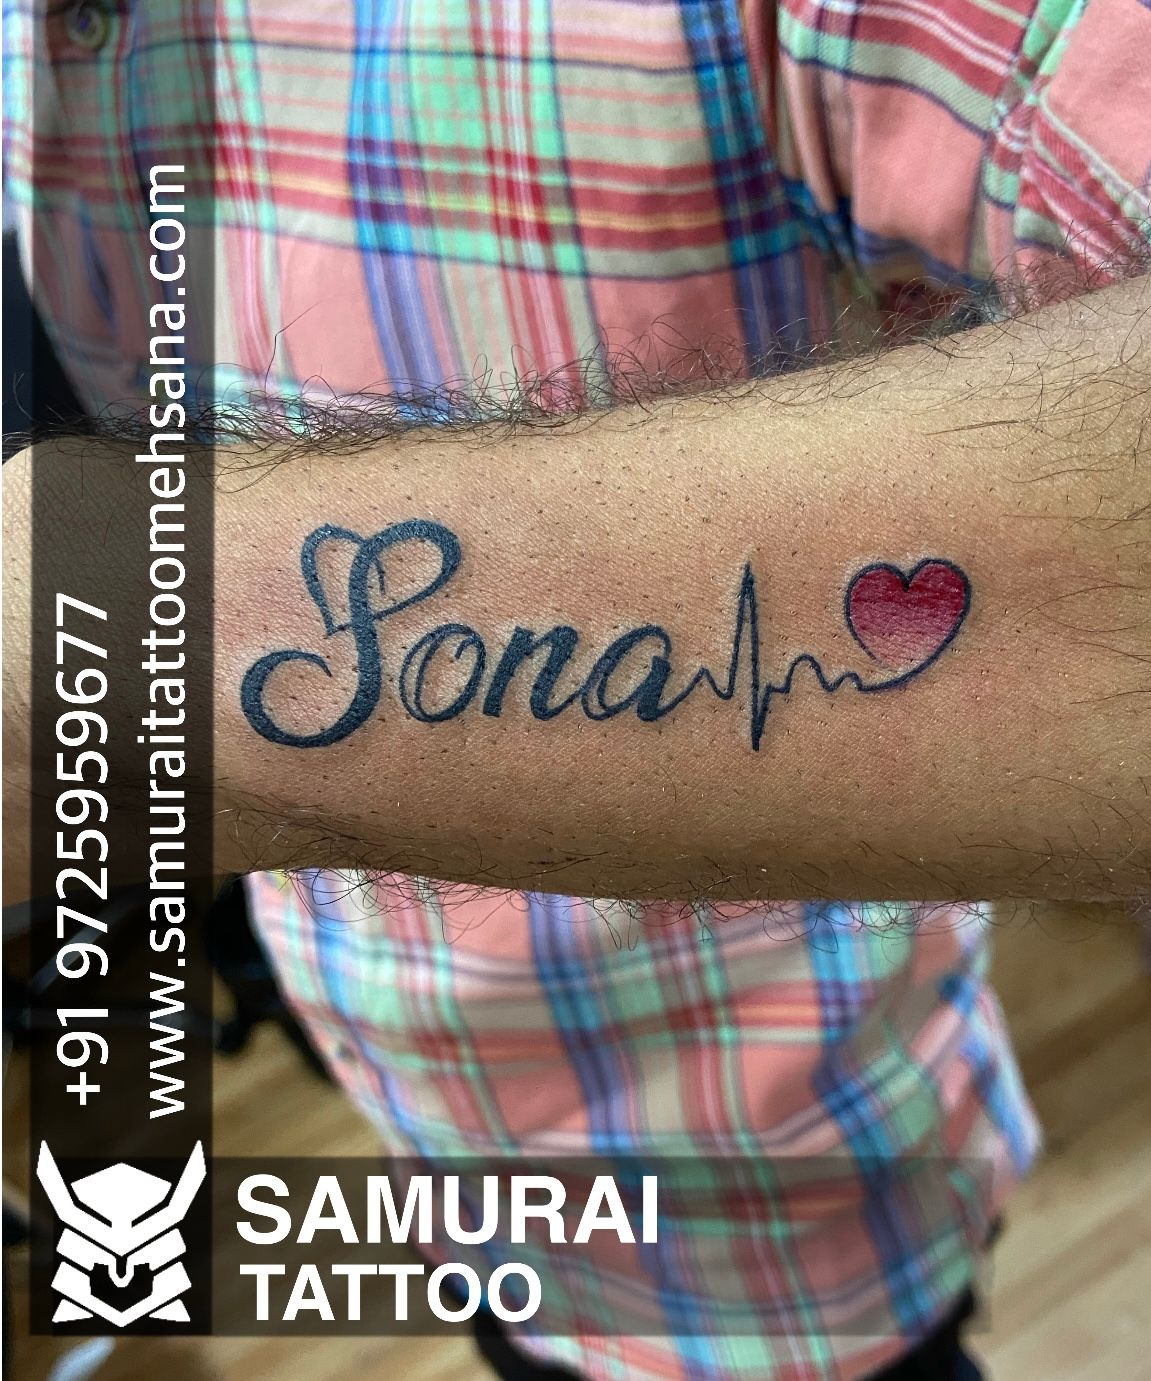 sona name letter tatto design by ck - YouTube